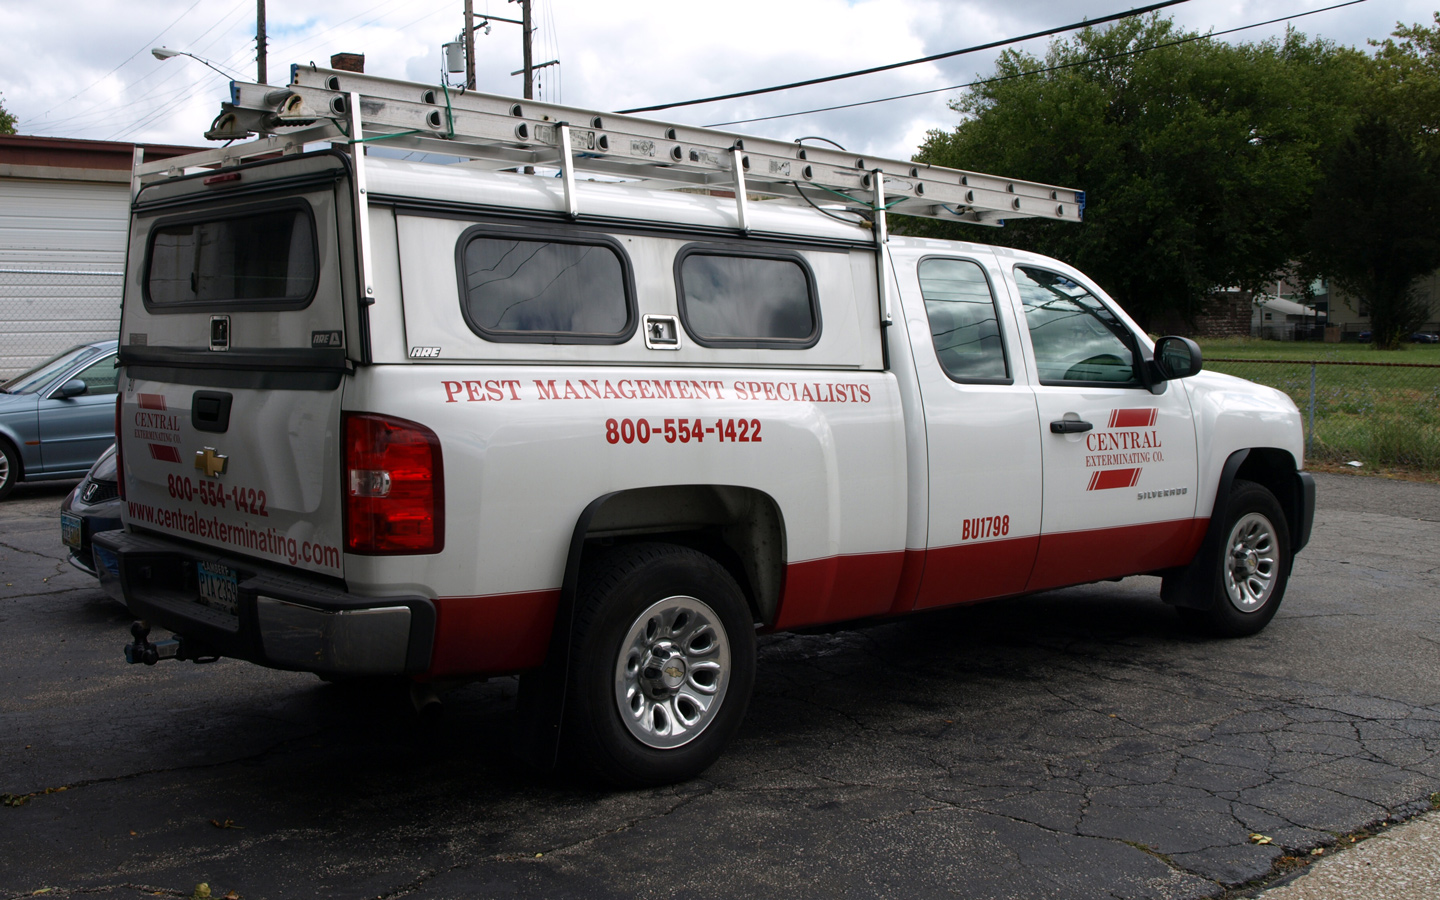 Photo of a Central Exterminating Co. truck.